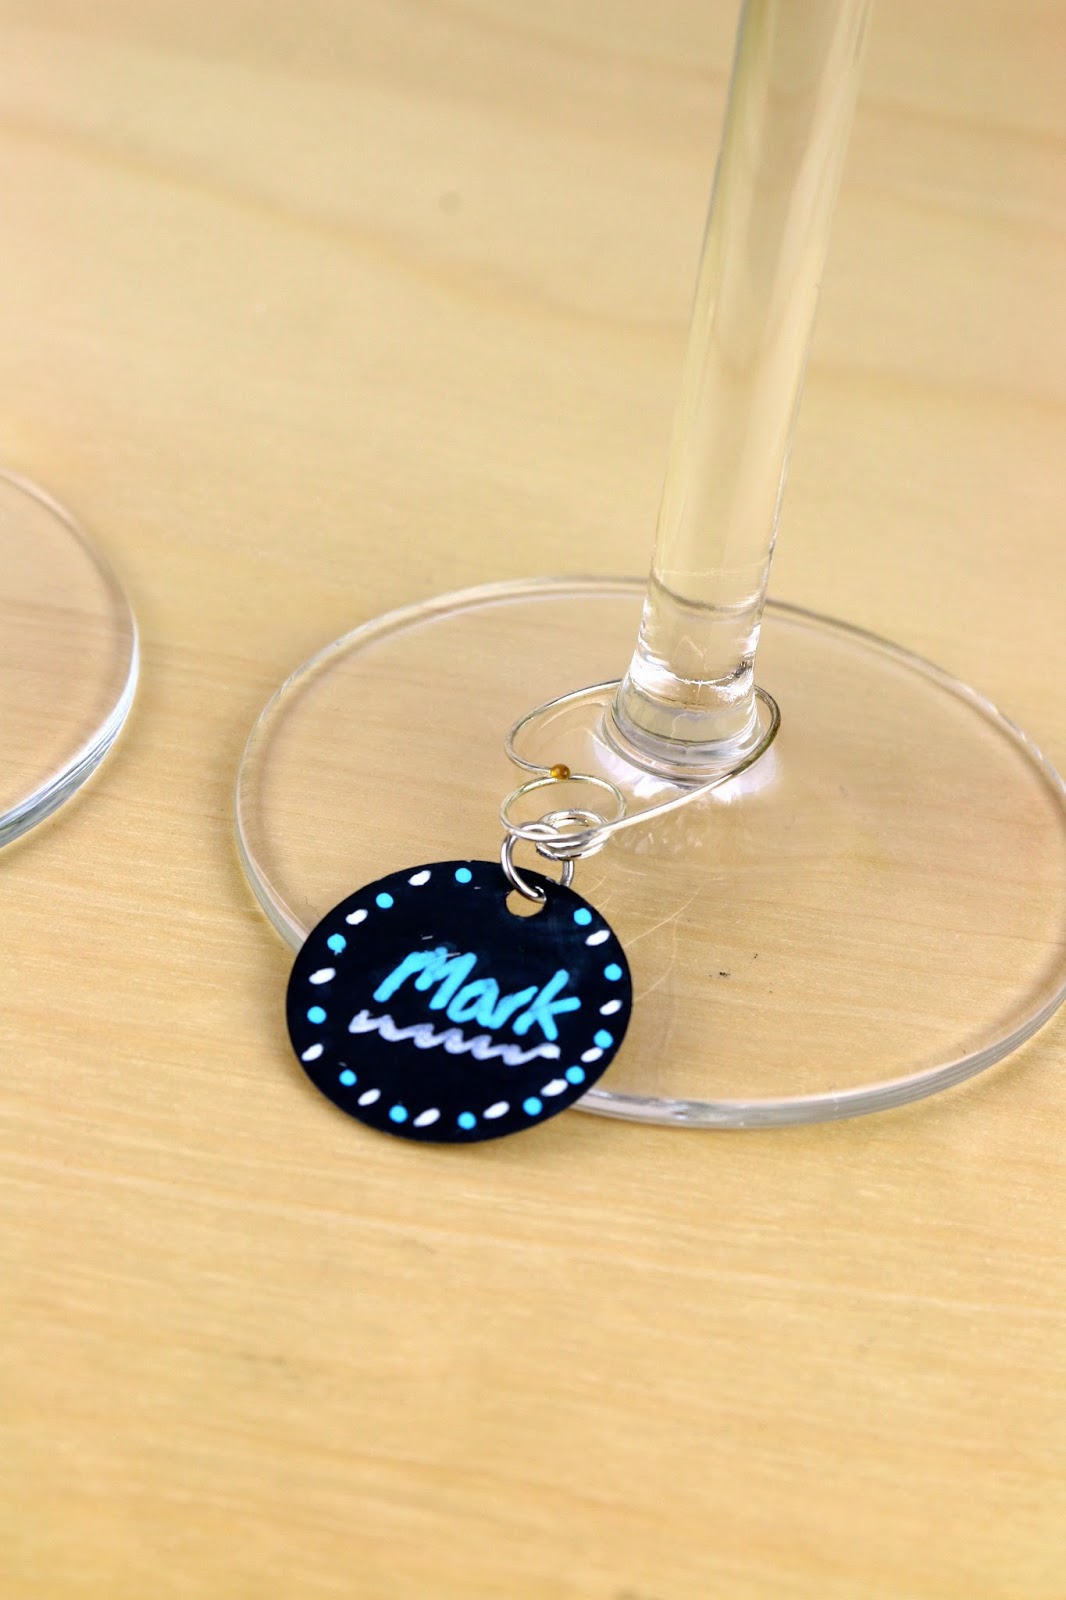 SRM Stickers Blog - Personalized Wine Glasses by Cathy A. - #easychalkboardmarker #chalkboard #markers #white #flourencent #personization #DIY